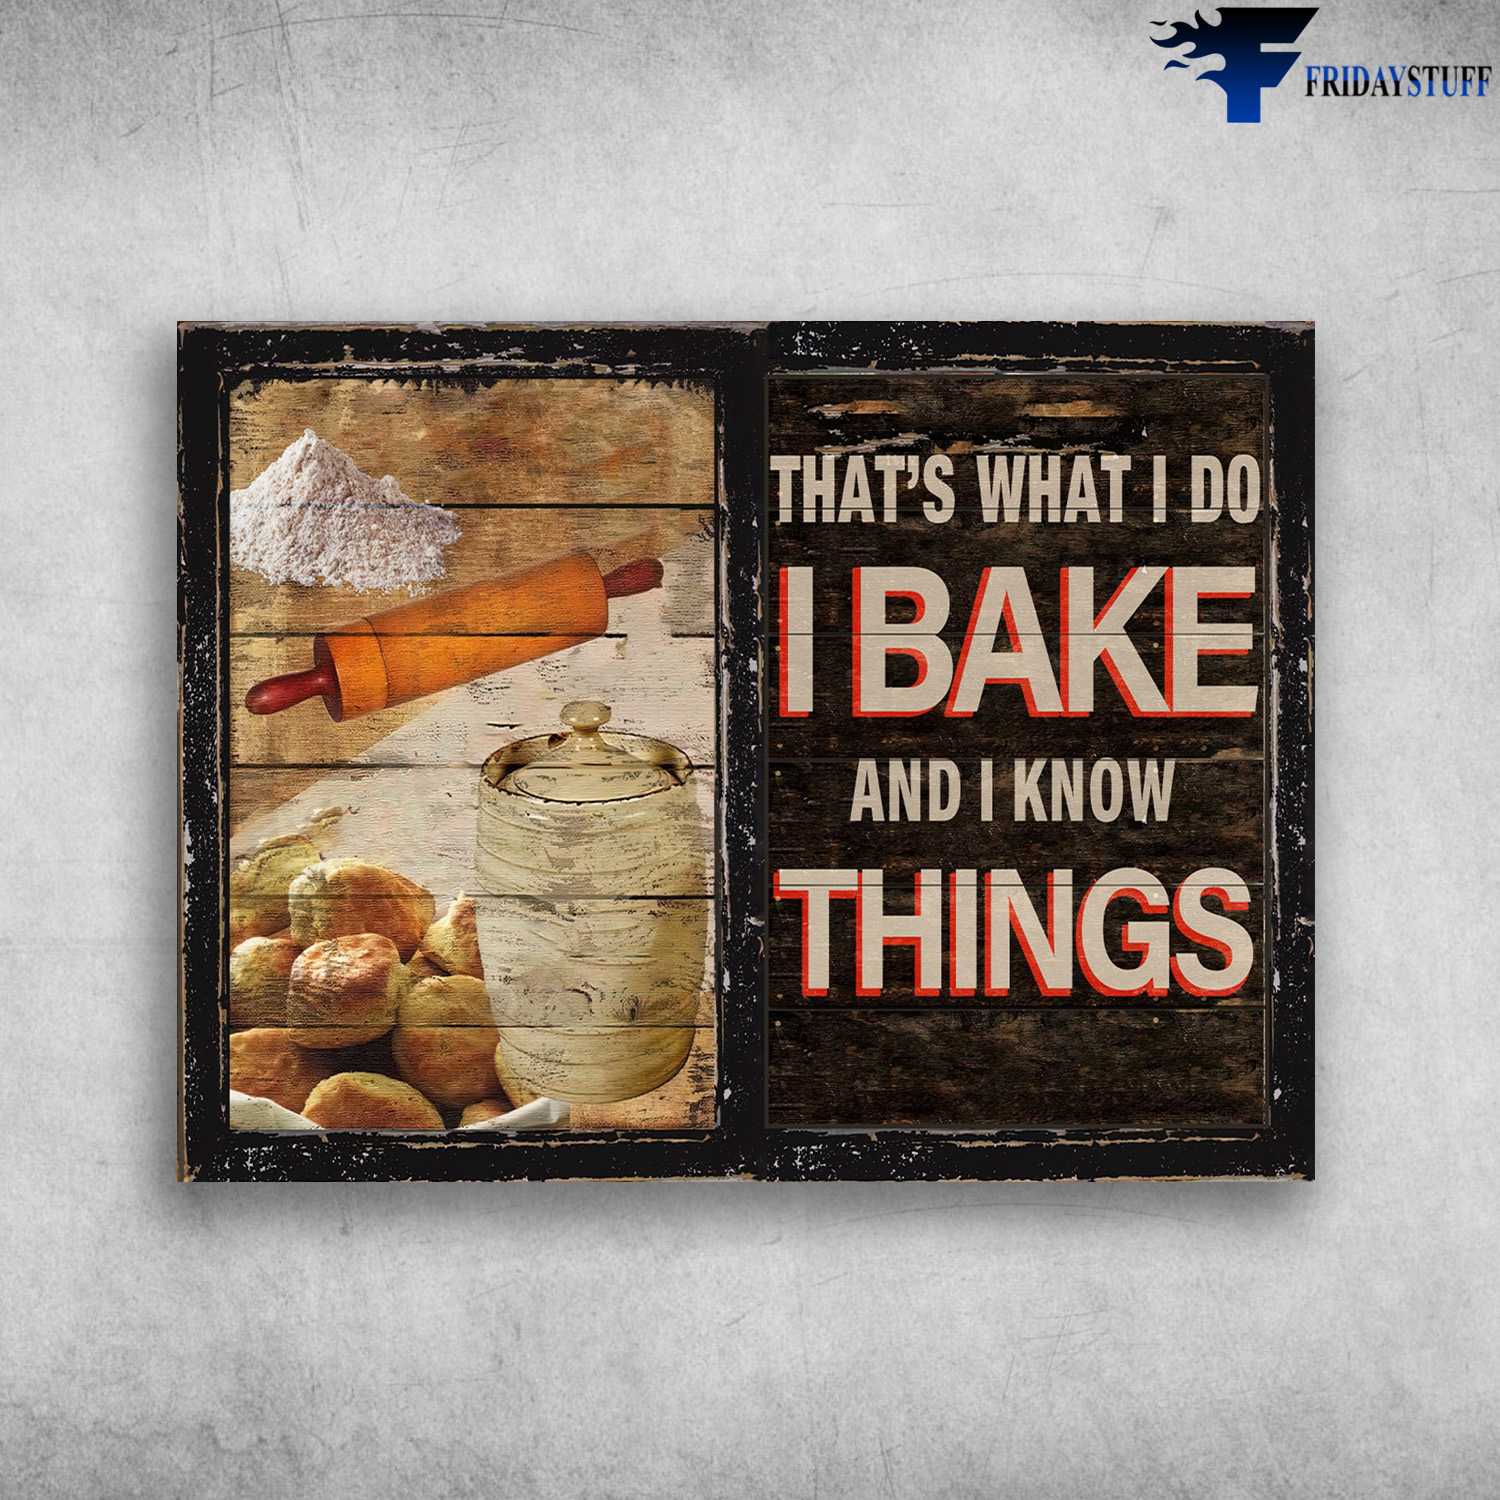 Baking Poster, Cake Baking, That's What I Do, I Bake, And I Know Things